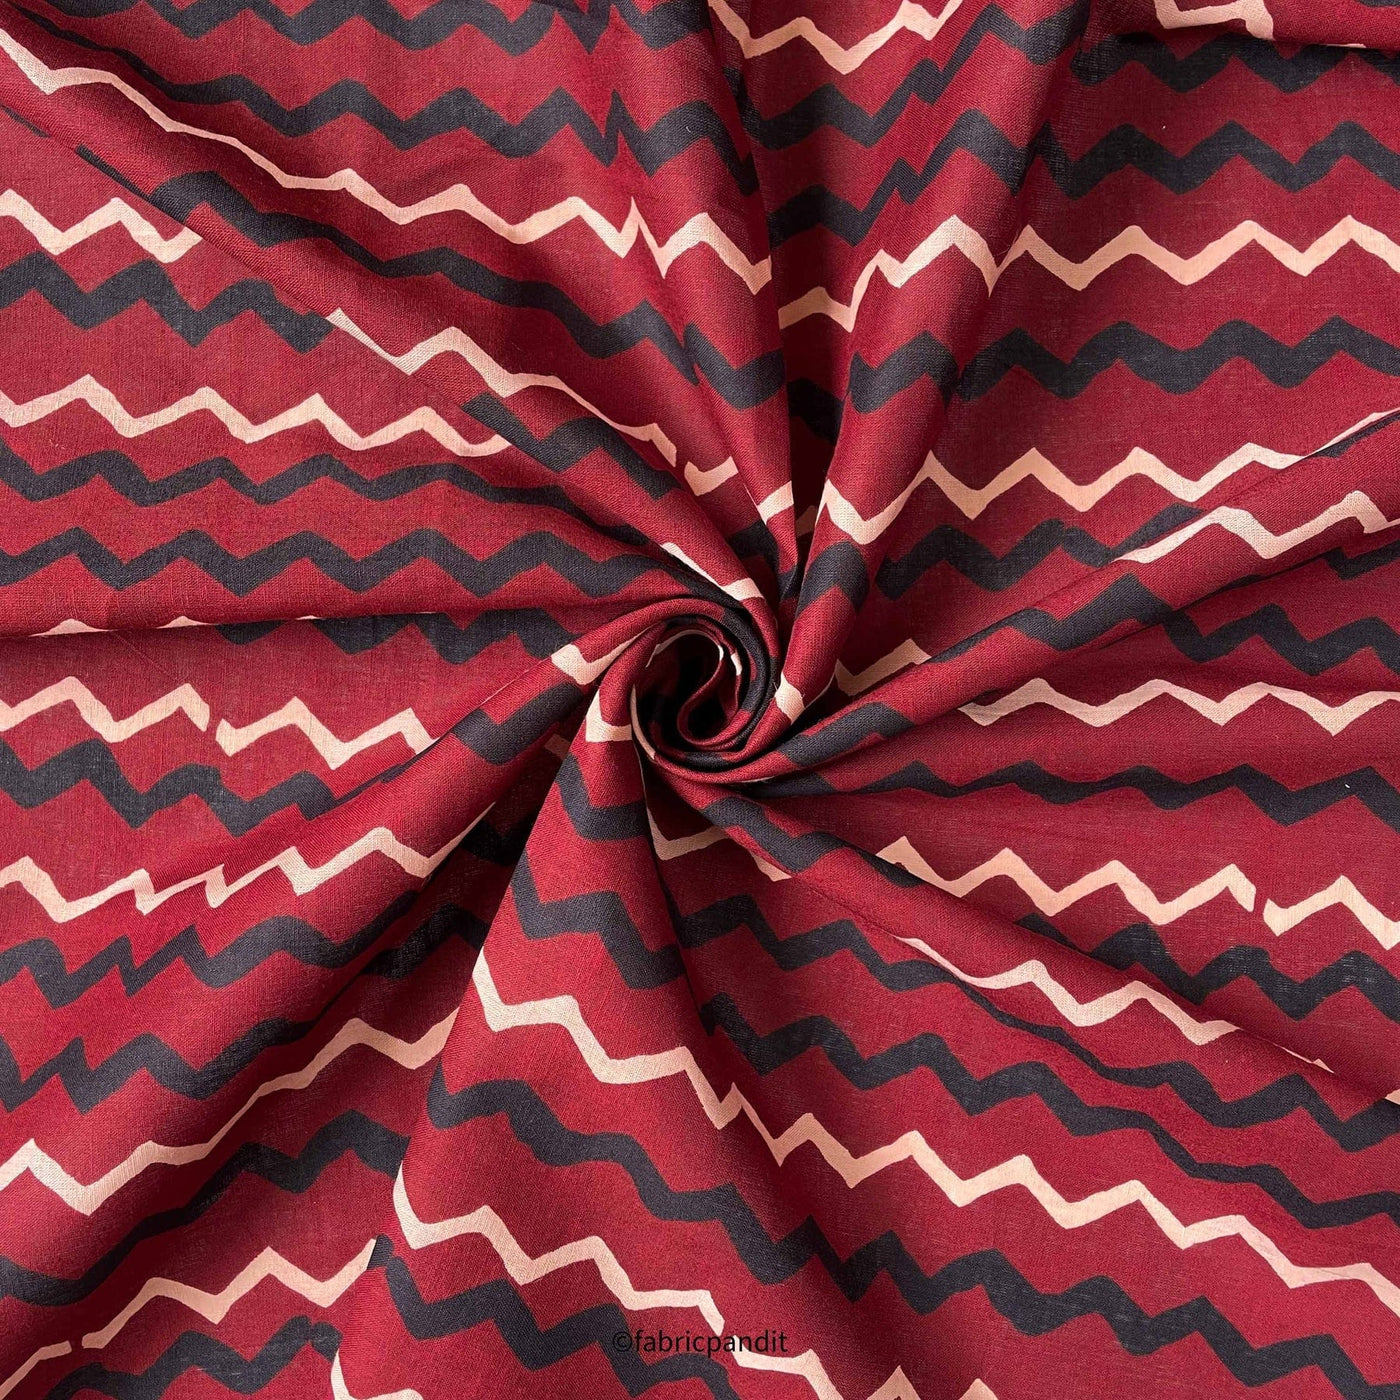 Fabric Pandit Fabric Red & Black Zig- Zag Pattern Hand Block Printed Pure Cotton Fabric (Width 42 inches)